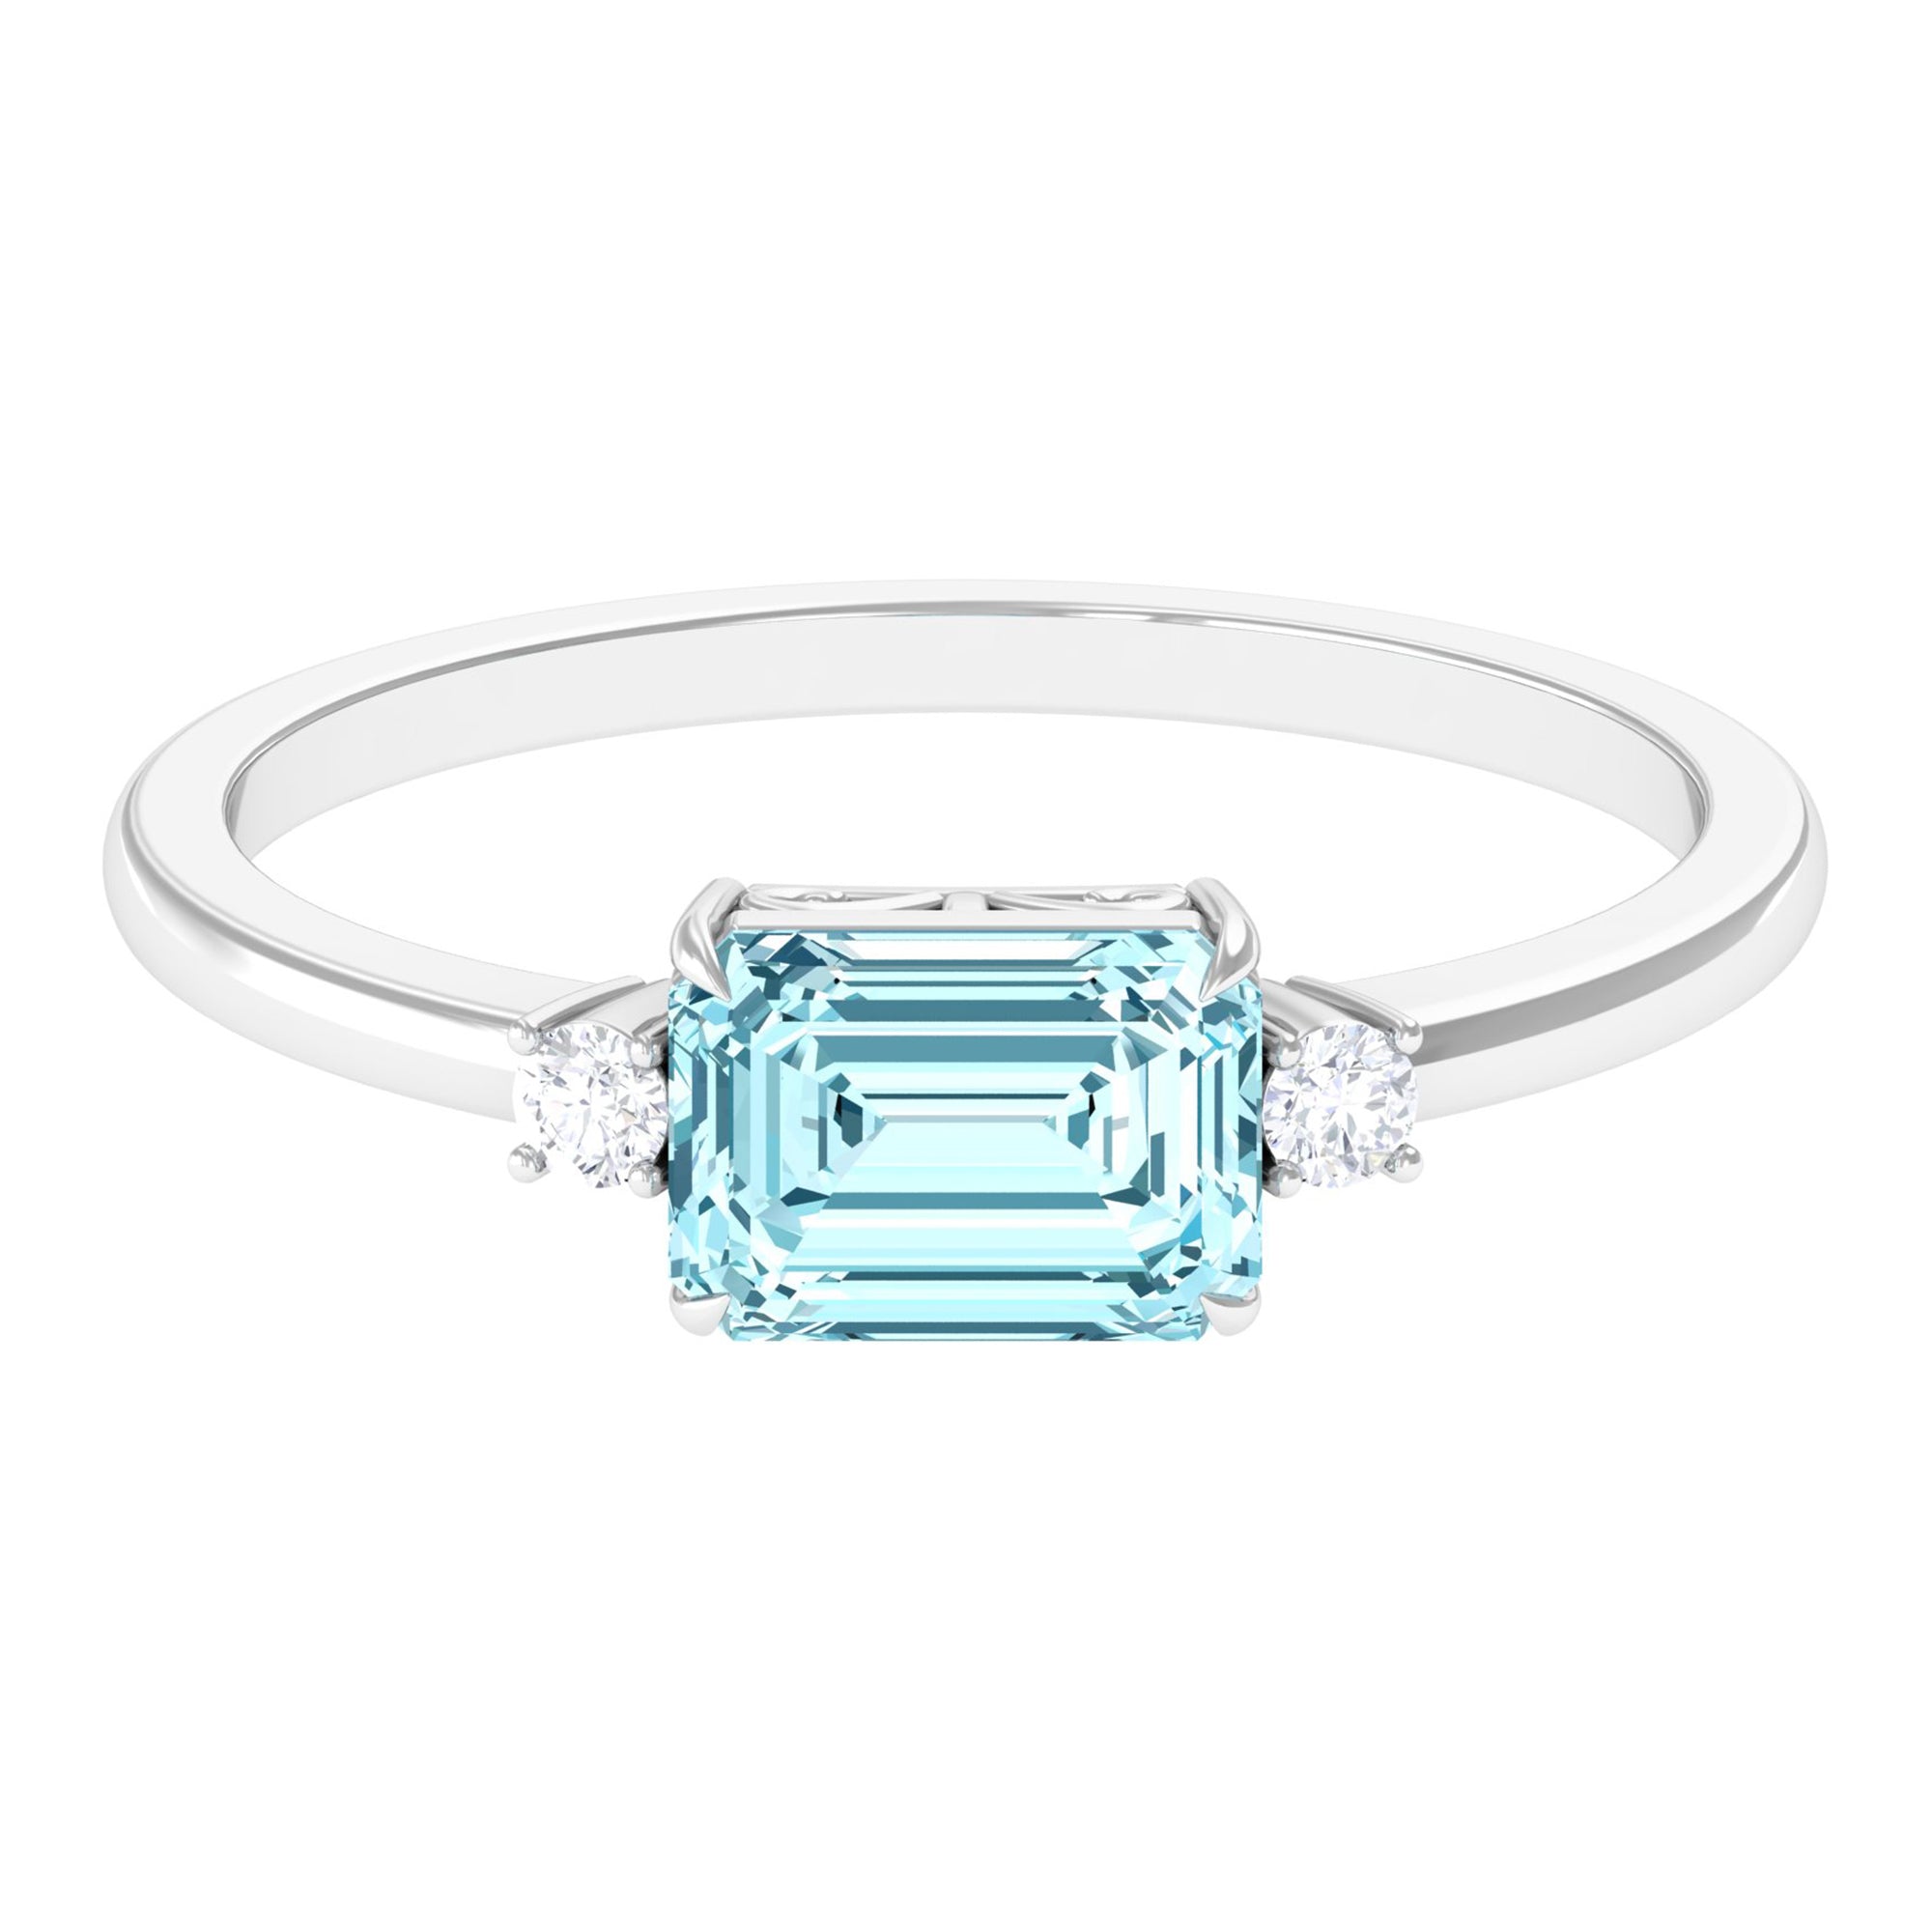 Emerald Cut Aquamarine Solitaire Engagement Ring in East West Style with Diamond Aquamarine - ( AAA ) - Quality - Rosec Jewels